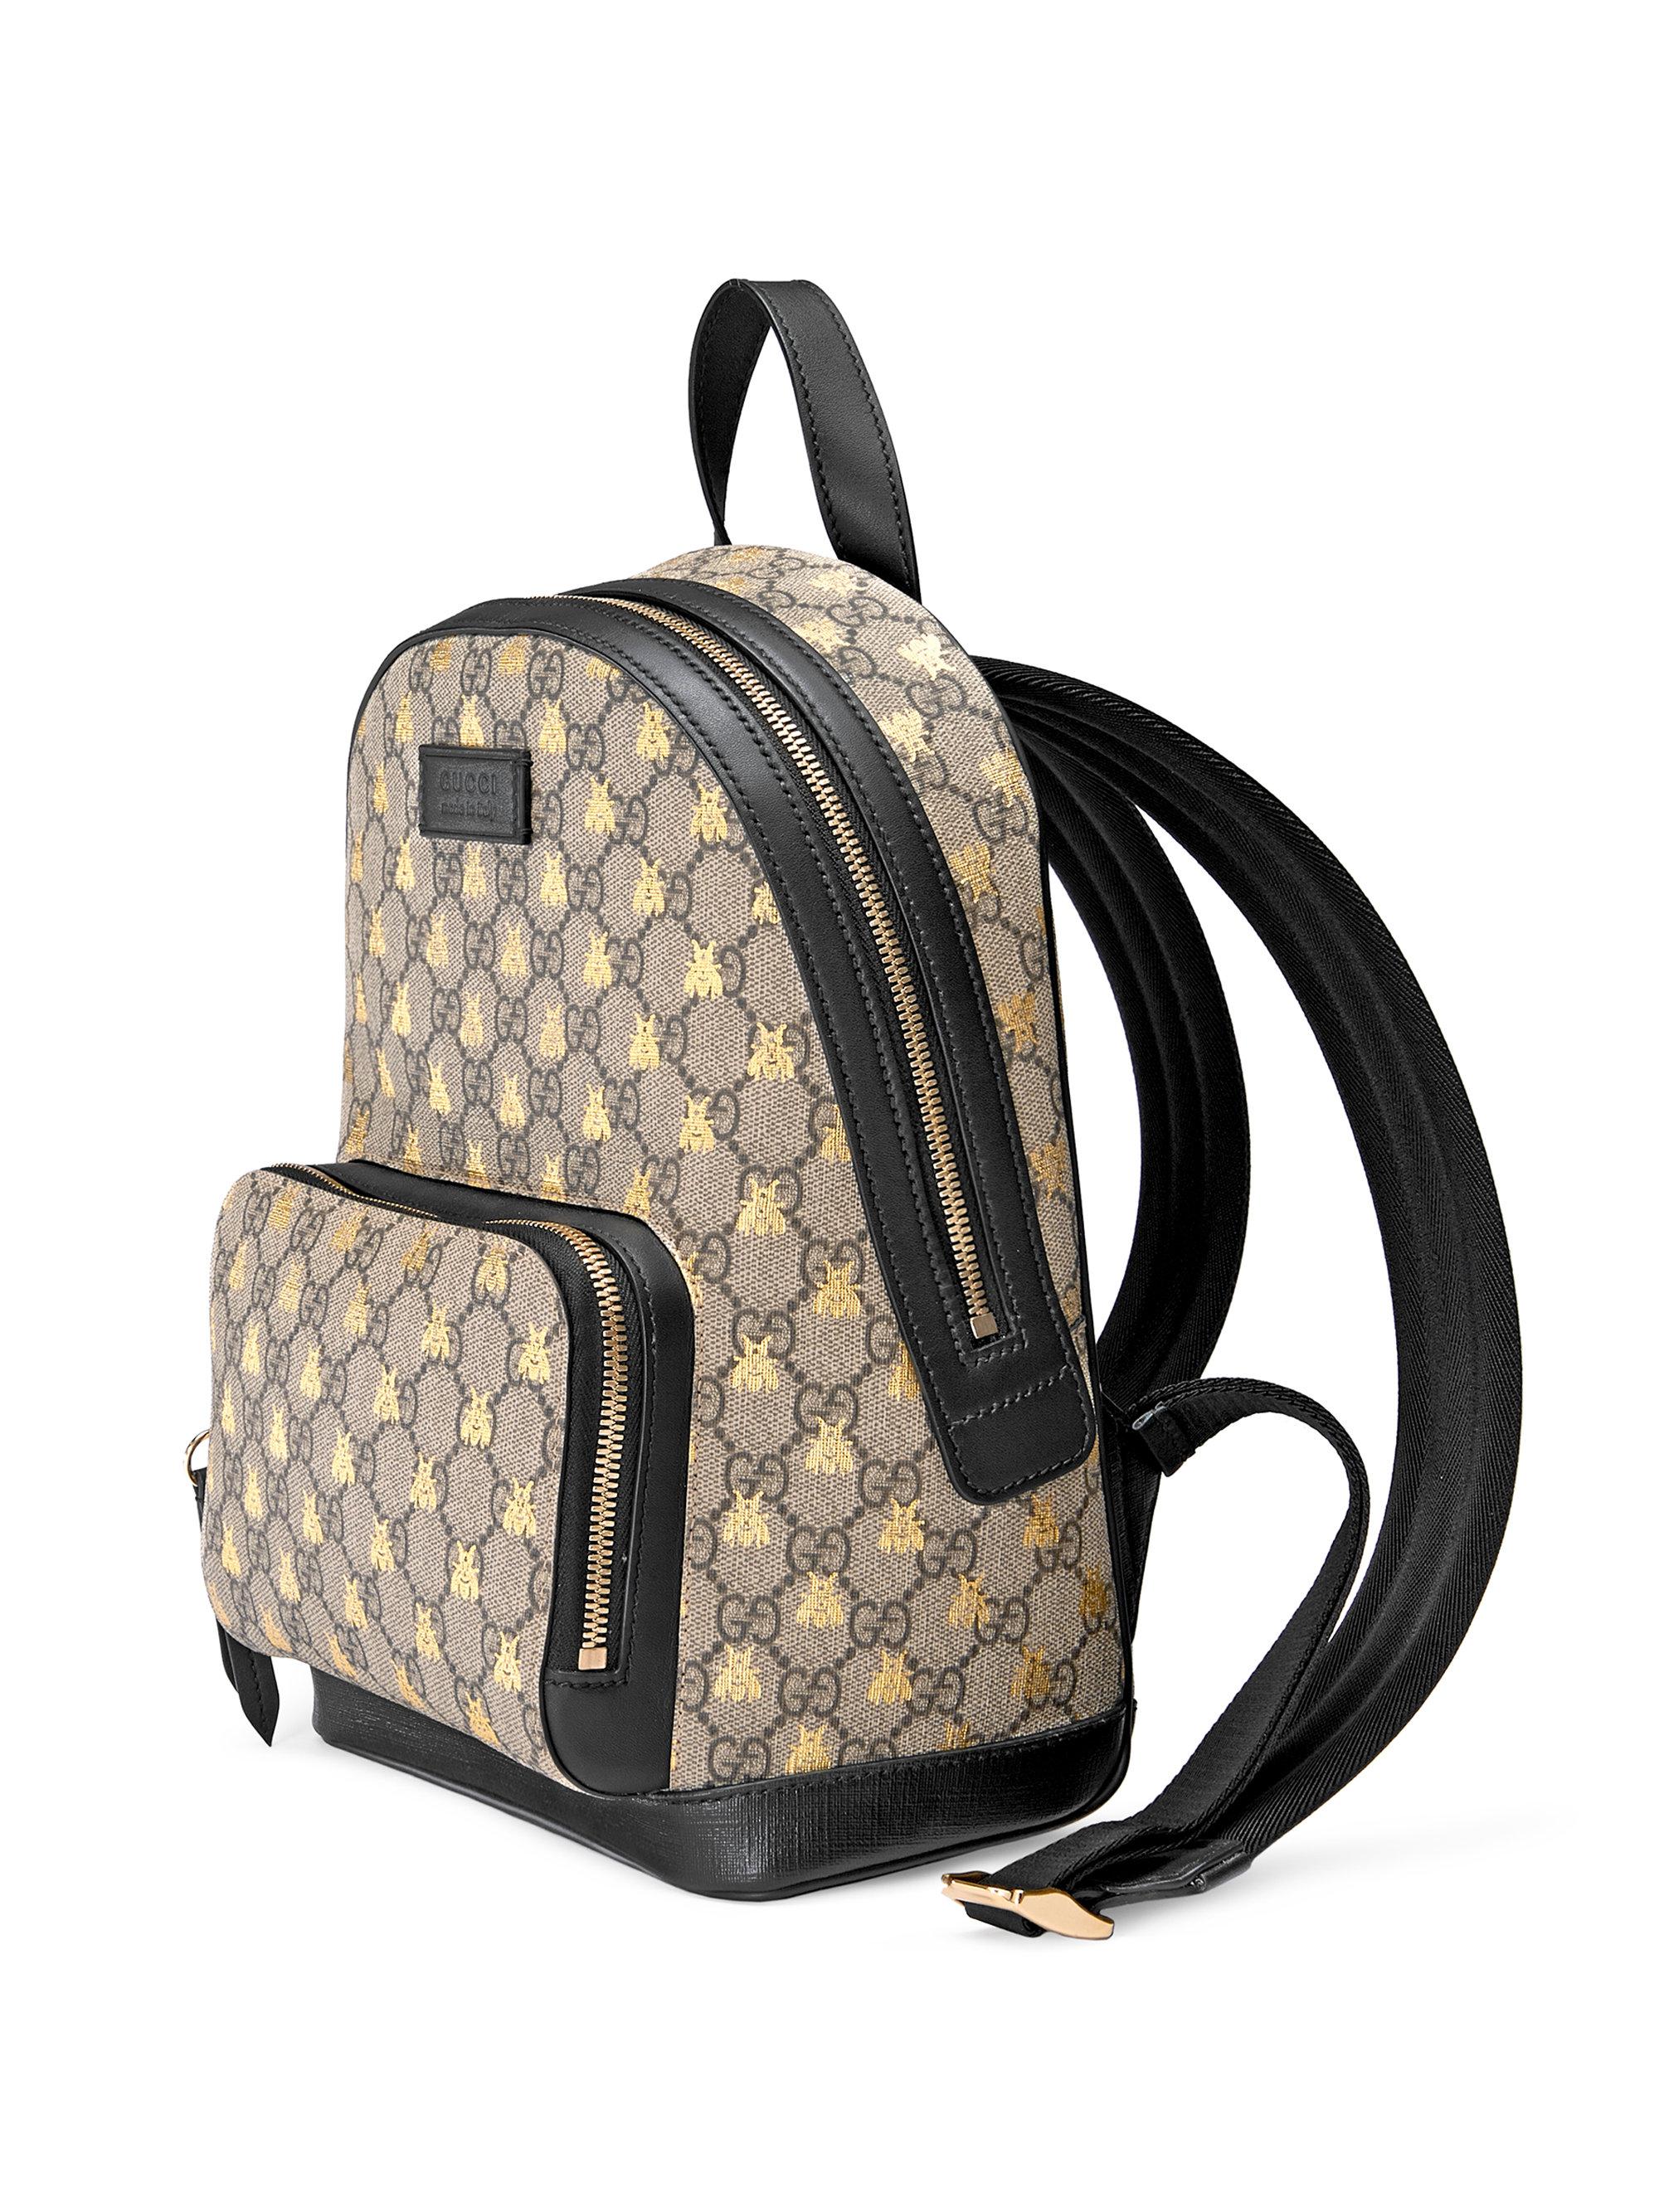 bumble bee gucci backpack